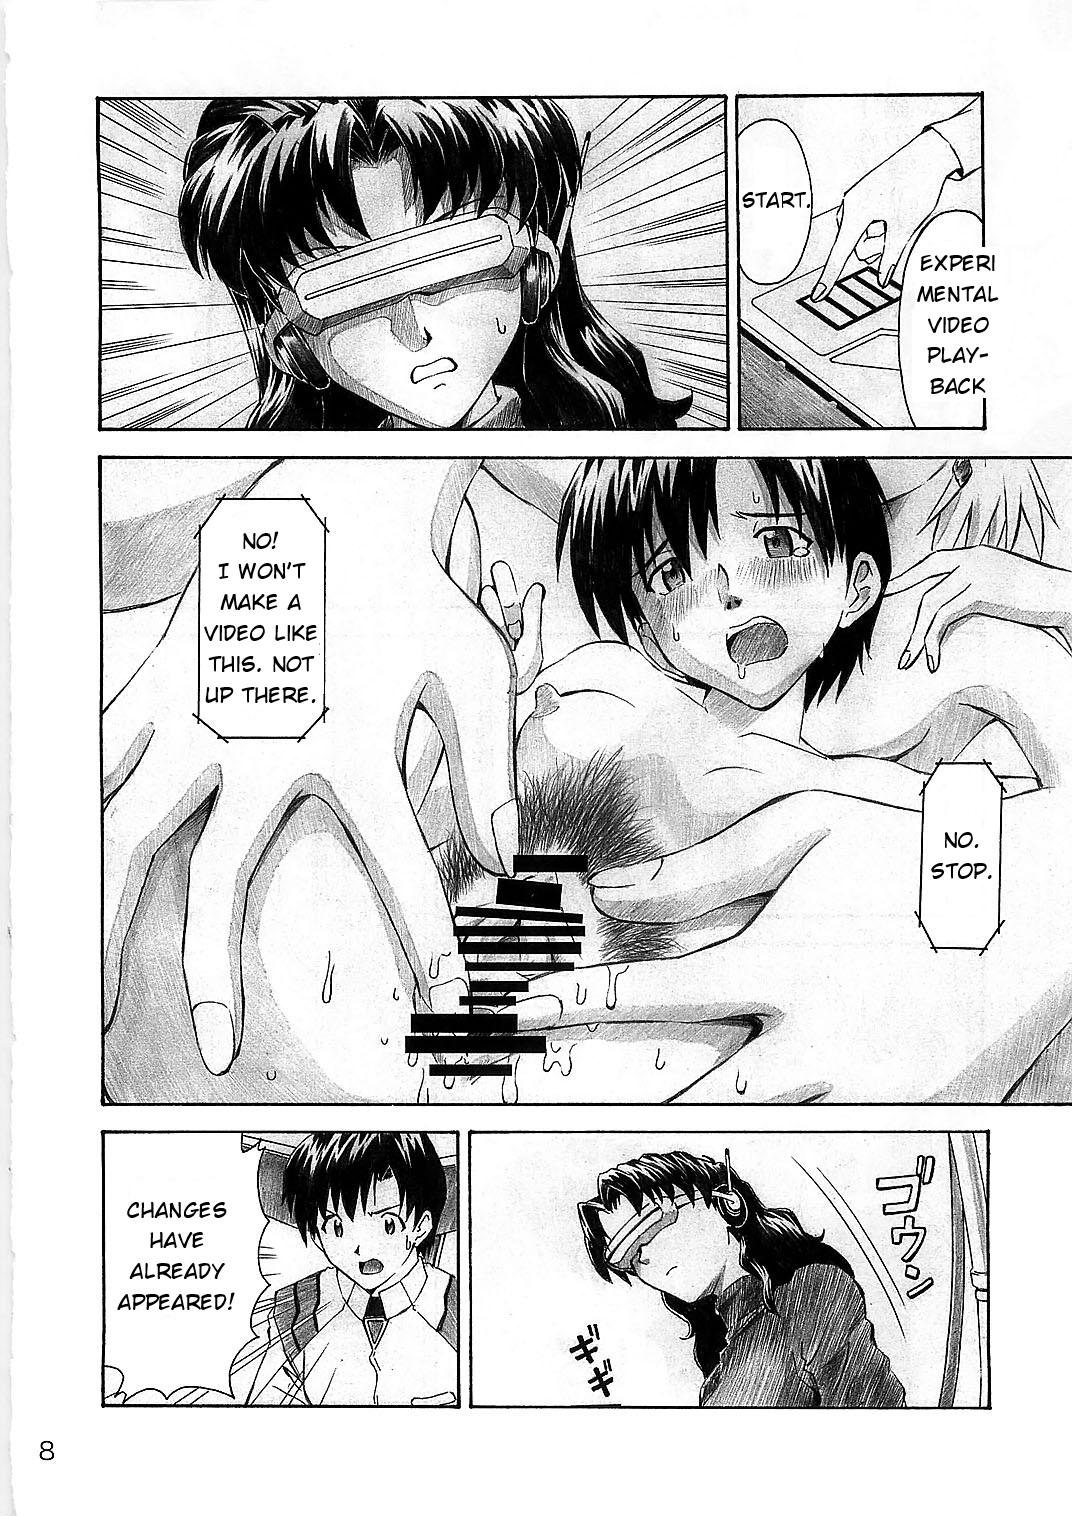 Sex Toys Wanna Try? - Neon genesis evangelion Gay Outdoor - Page 9